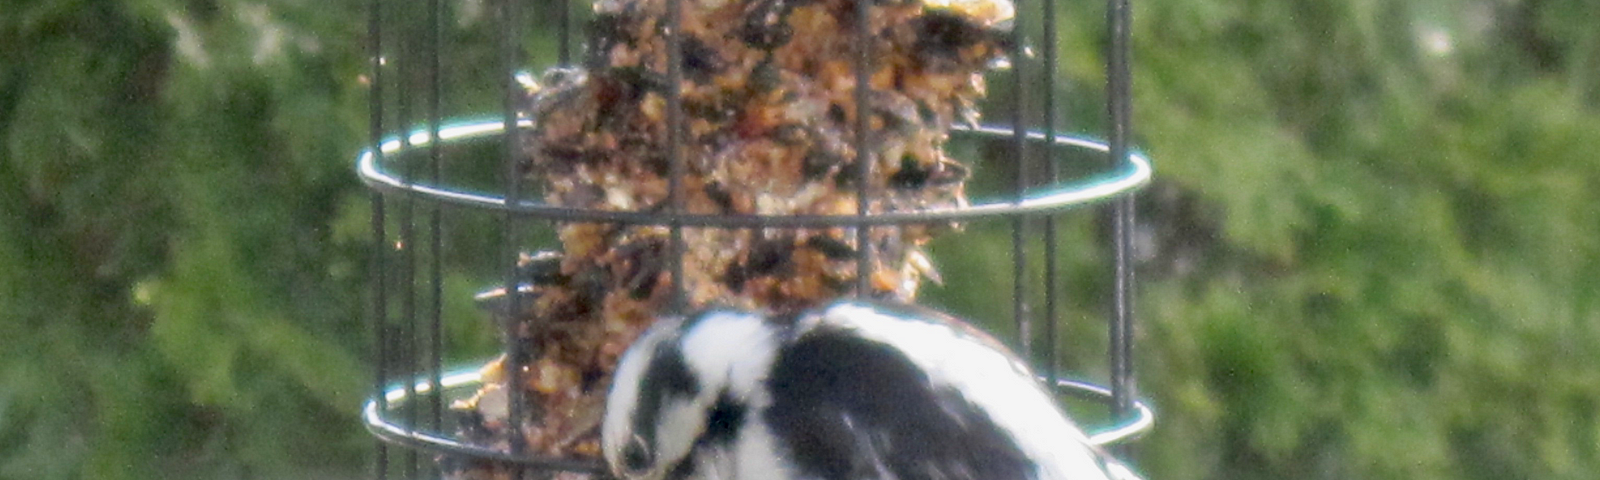 Author’s photo of downy woodpecker visiting her feeder.